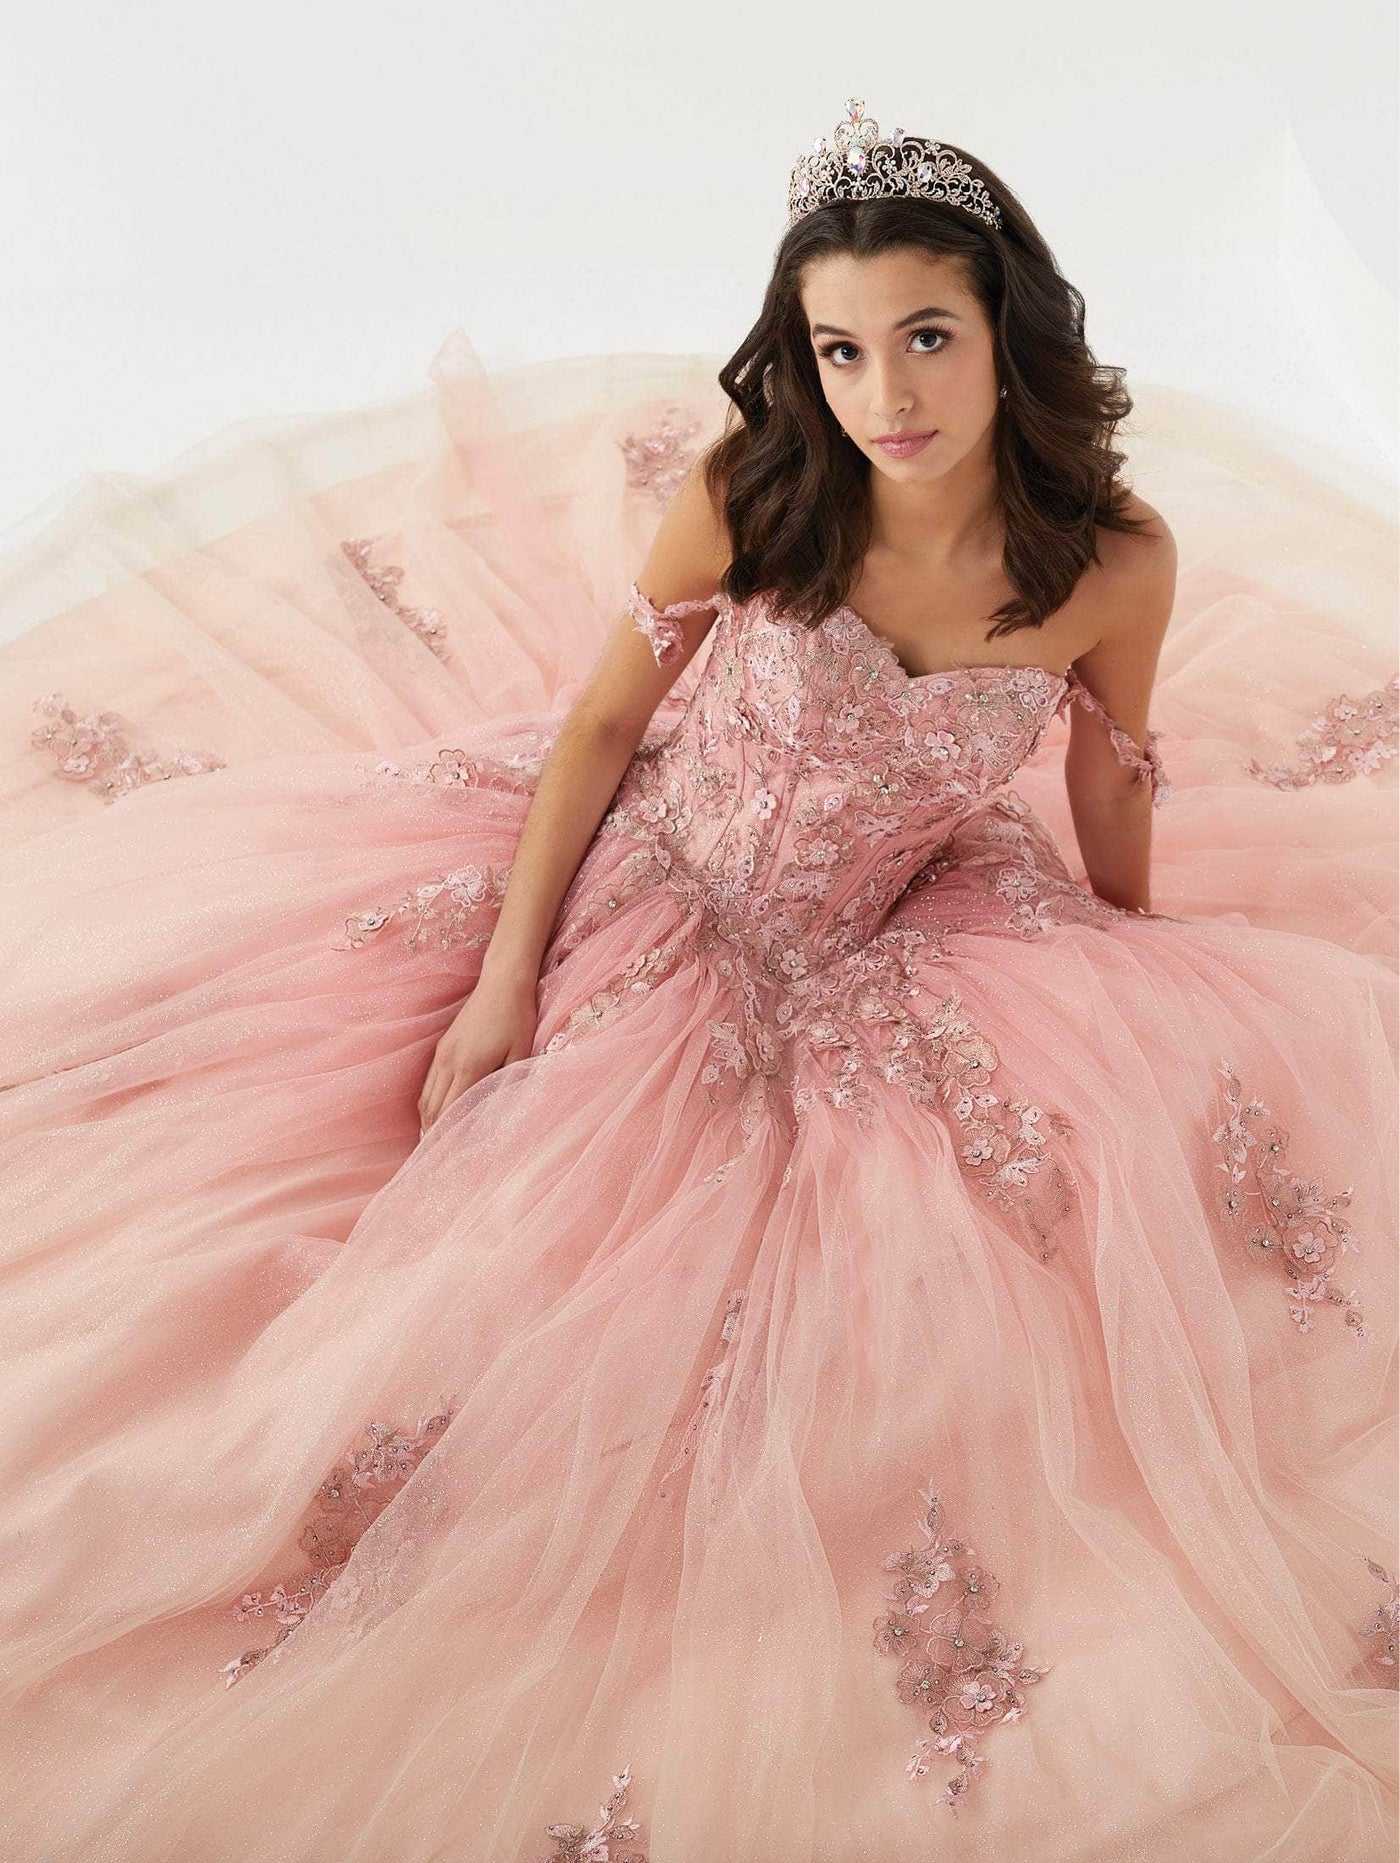 Fiesta Gowns 56470 - Corseted Floral Princess Ballgown Special Occasion Dress